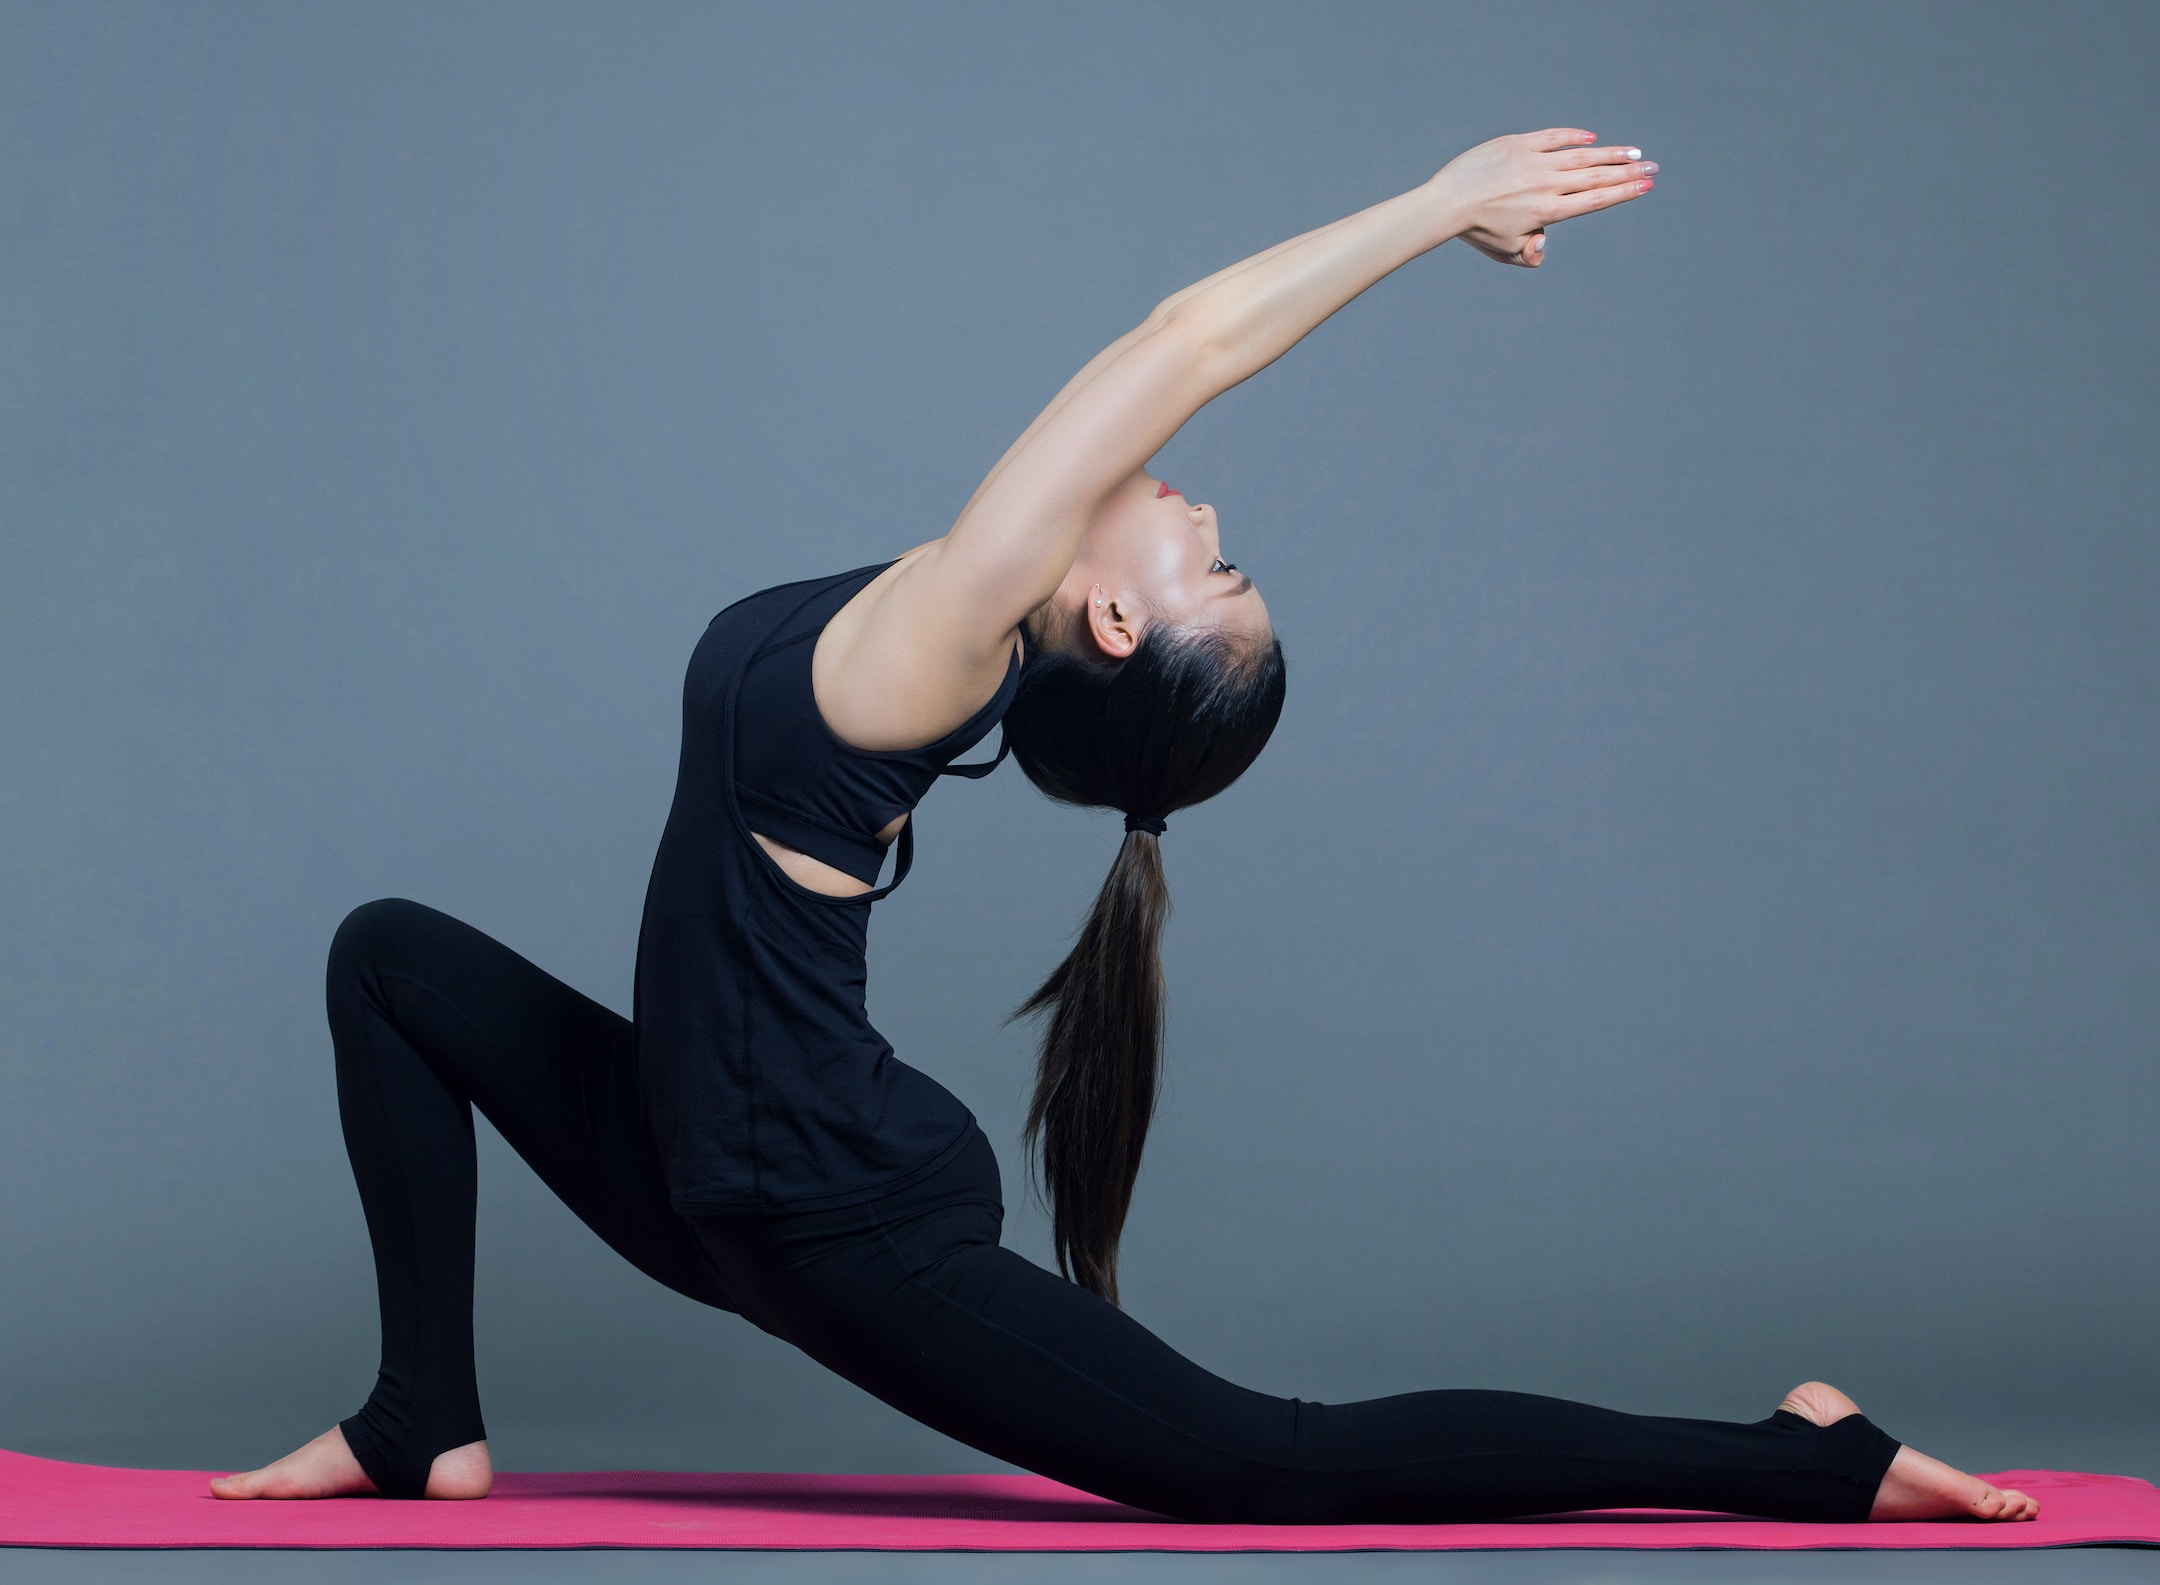 Best Yoga Poses For Weight Loss | Visual.ly